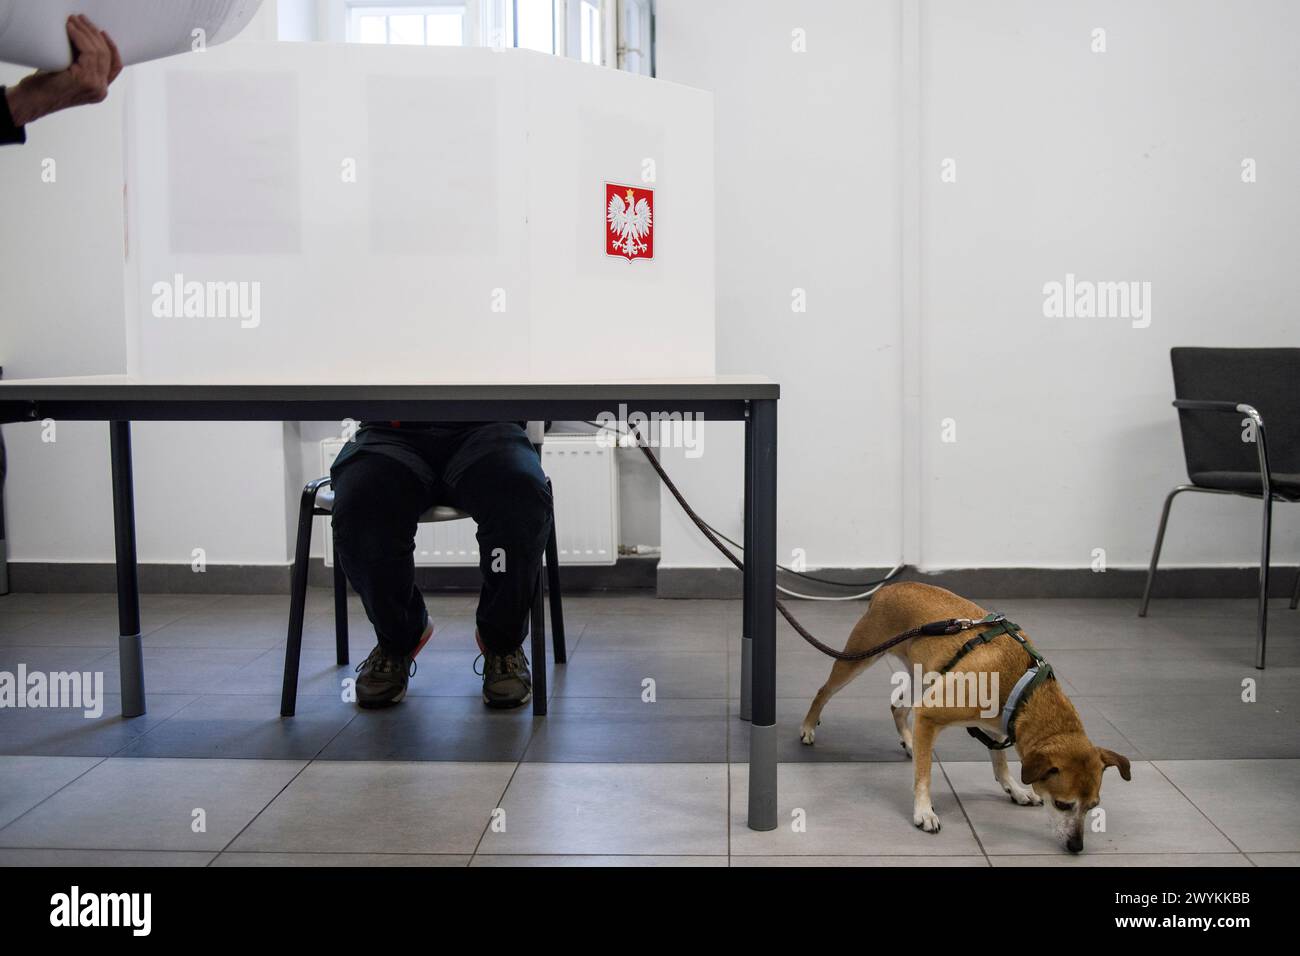 A dog is waiting while his owner fills out ballot card at the polling station in Warsaw during the local elections. Voters across Poland are casting ballots in local elections in the first electoral test for the coalition government of PM Donald Tusk nearly four months since it took power. Voters elected mayors as well as members of municipal councils and provincial assemblies. Among those running is Rafal Trzaskowski - Mayor of Warsaw, a Tusk ally who is seeking a second term. Opinion polls showed the two largest political formations running neck-and-neck: Tusk's Civic Coalition, an electora Stock Photo